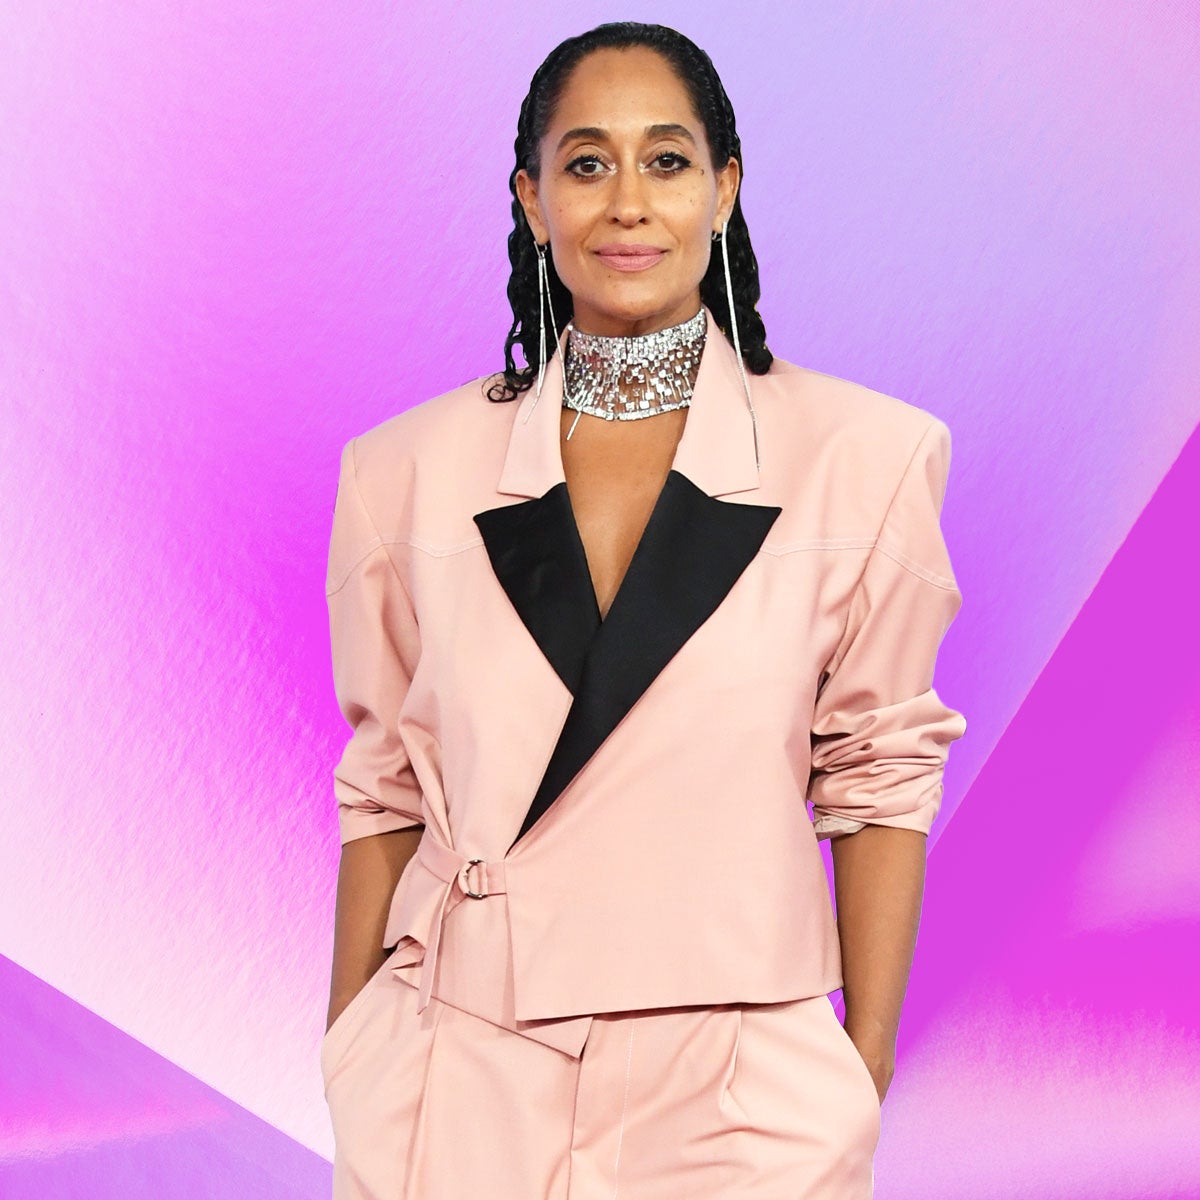 She Did It For The Culture: Tracee Ellis Ross Wore All Black Designers For The AMAs